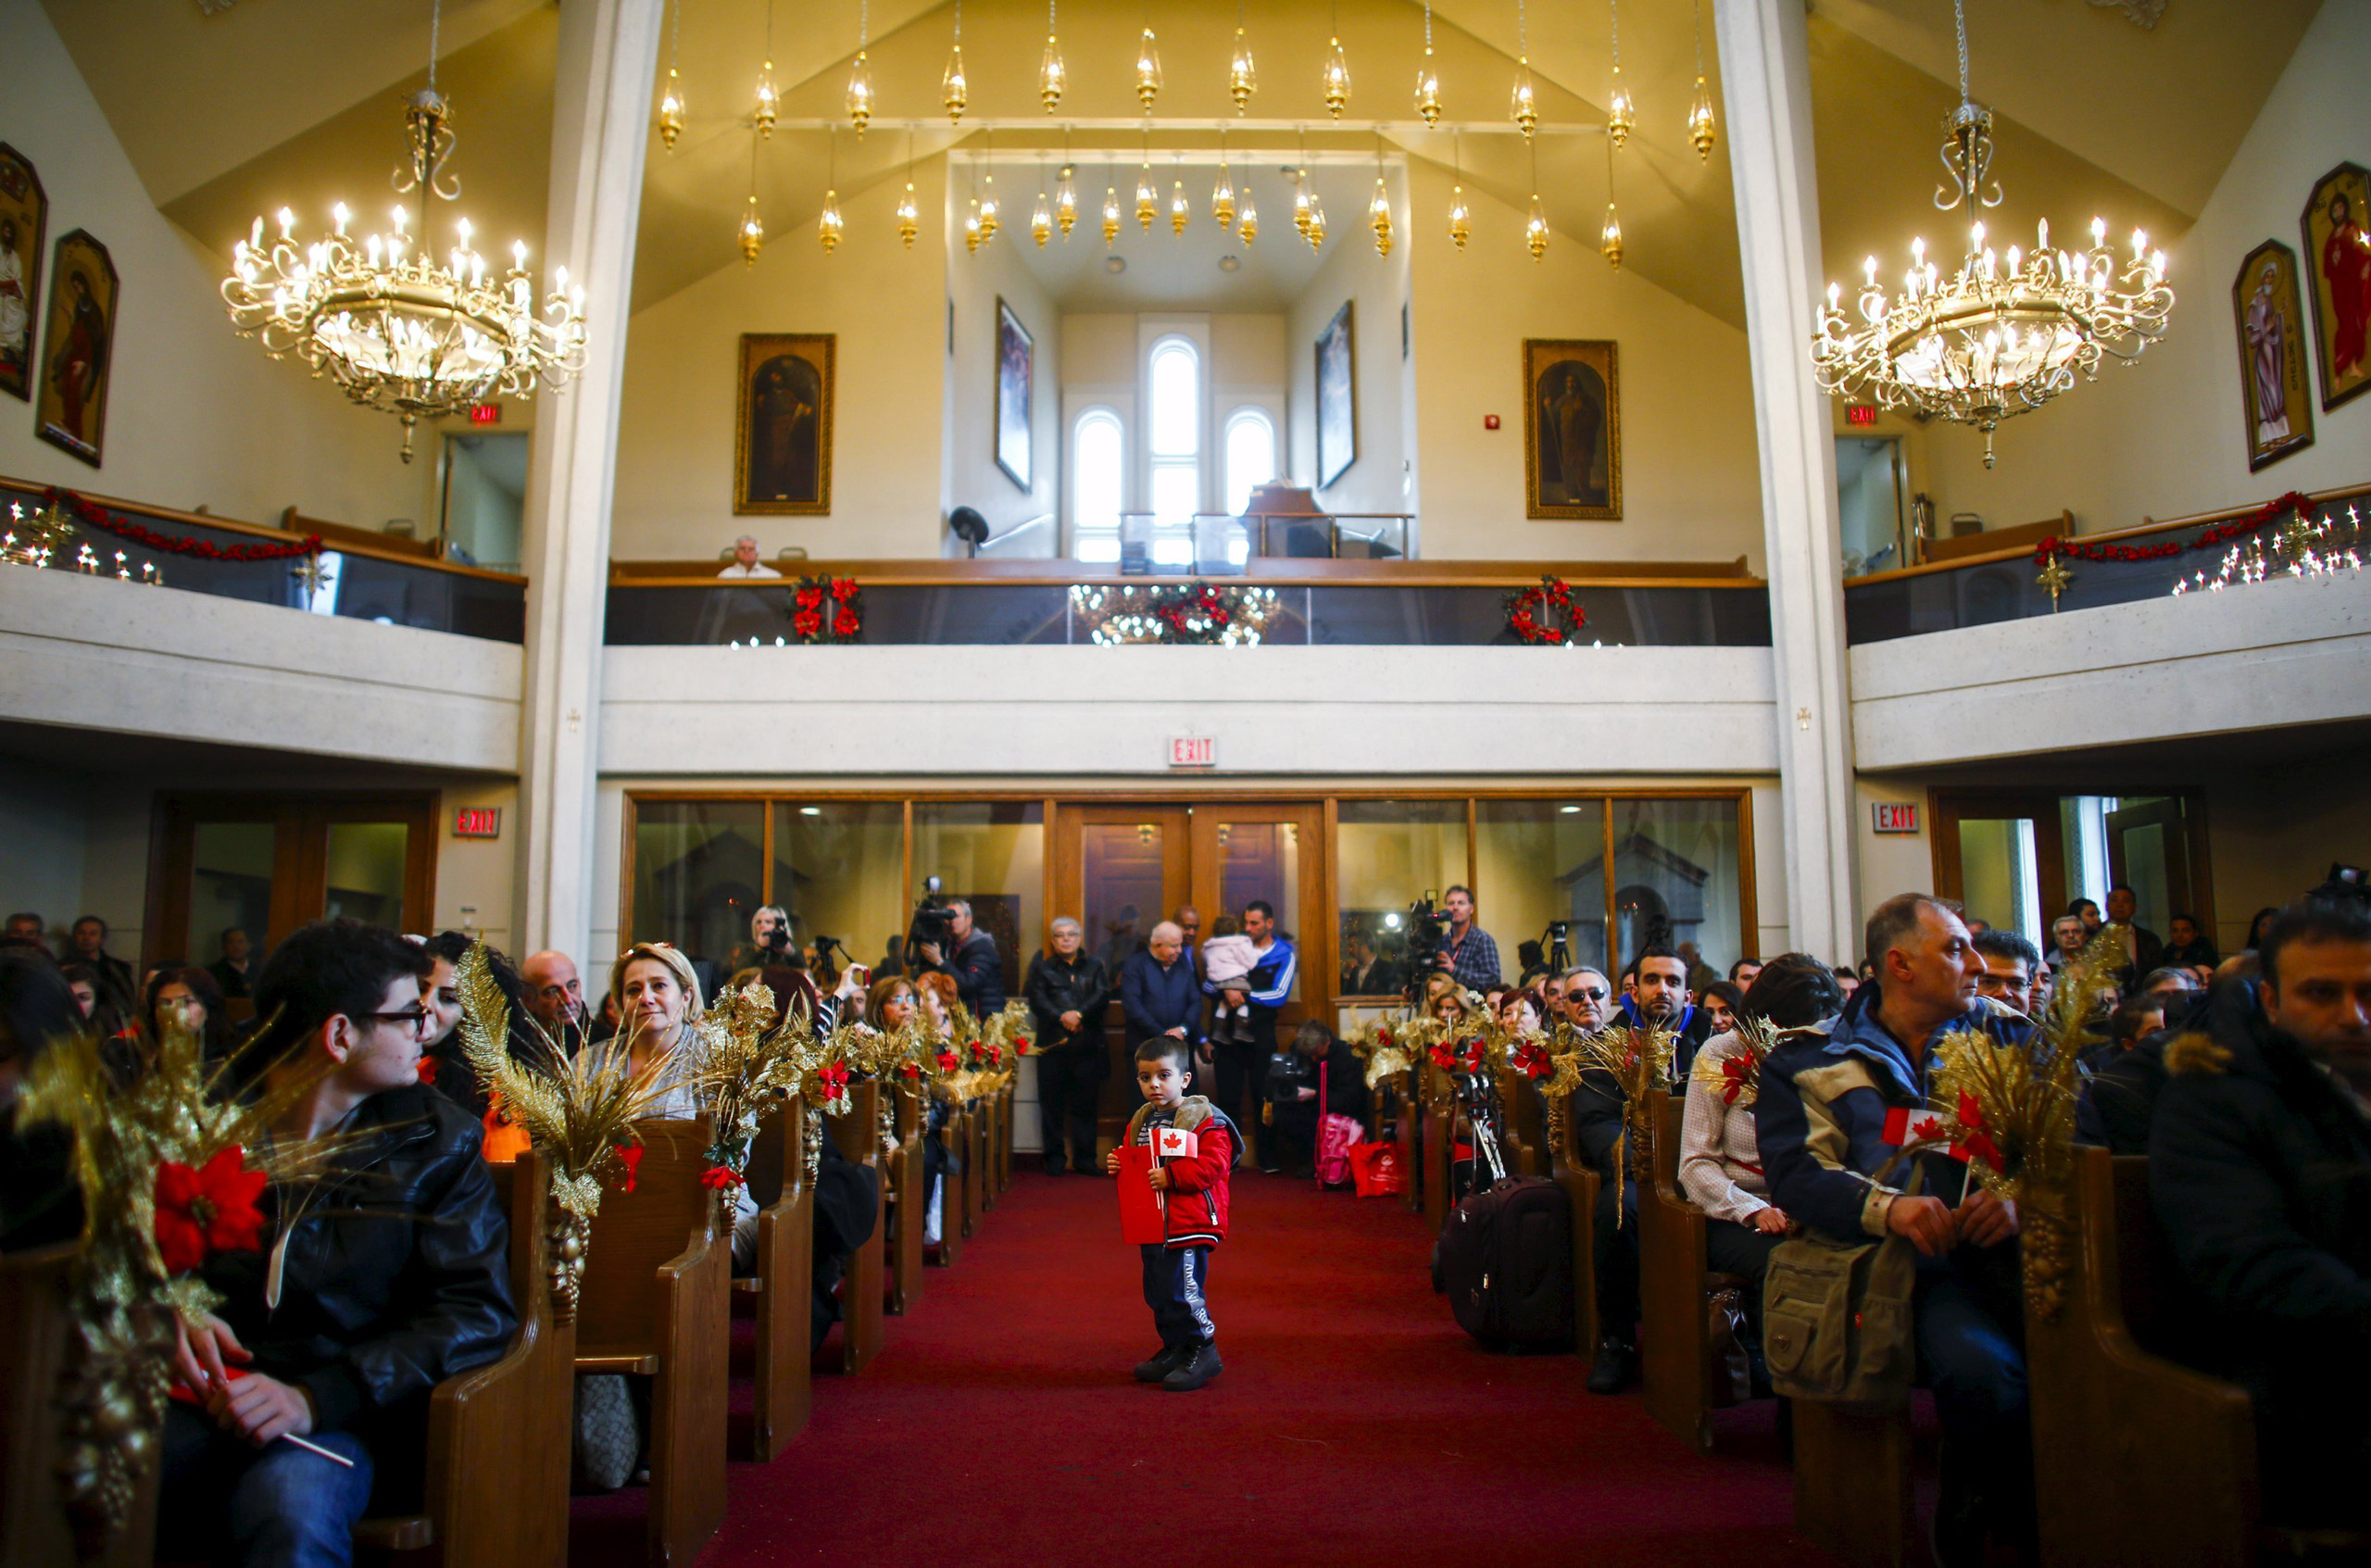 Syrian refugee Levon Kourken, 4, stands on an aisle during a welcoming service for Syrian refugees at St. Mary Armenian Apostolic Church in Toronto on Dec. 11, 2015. (Mark Blinch—Reuters)